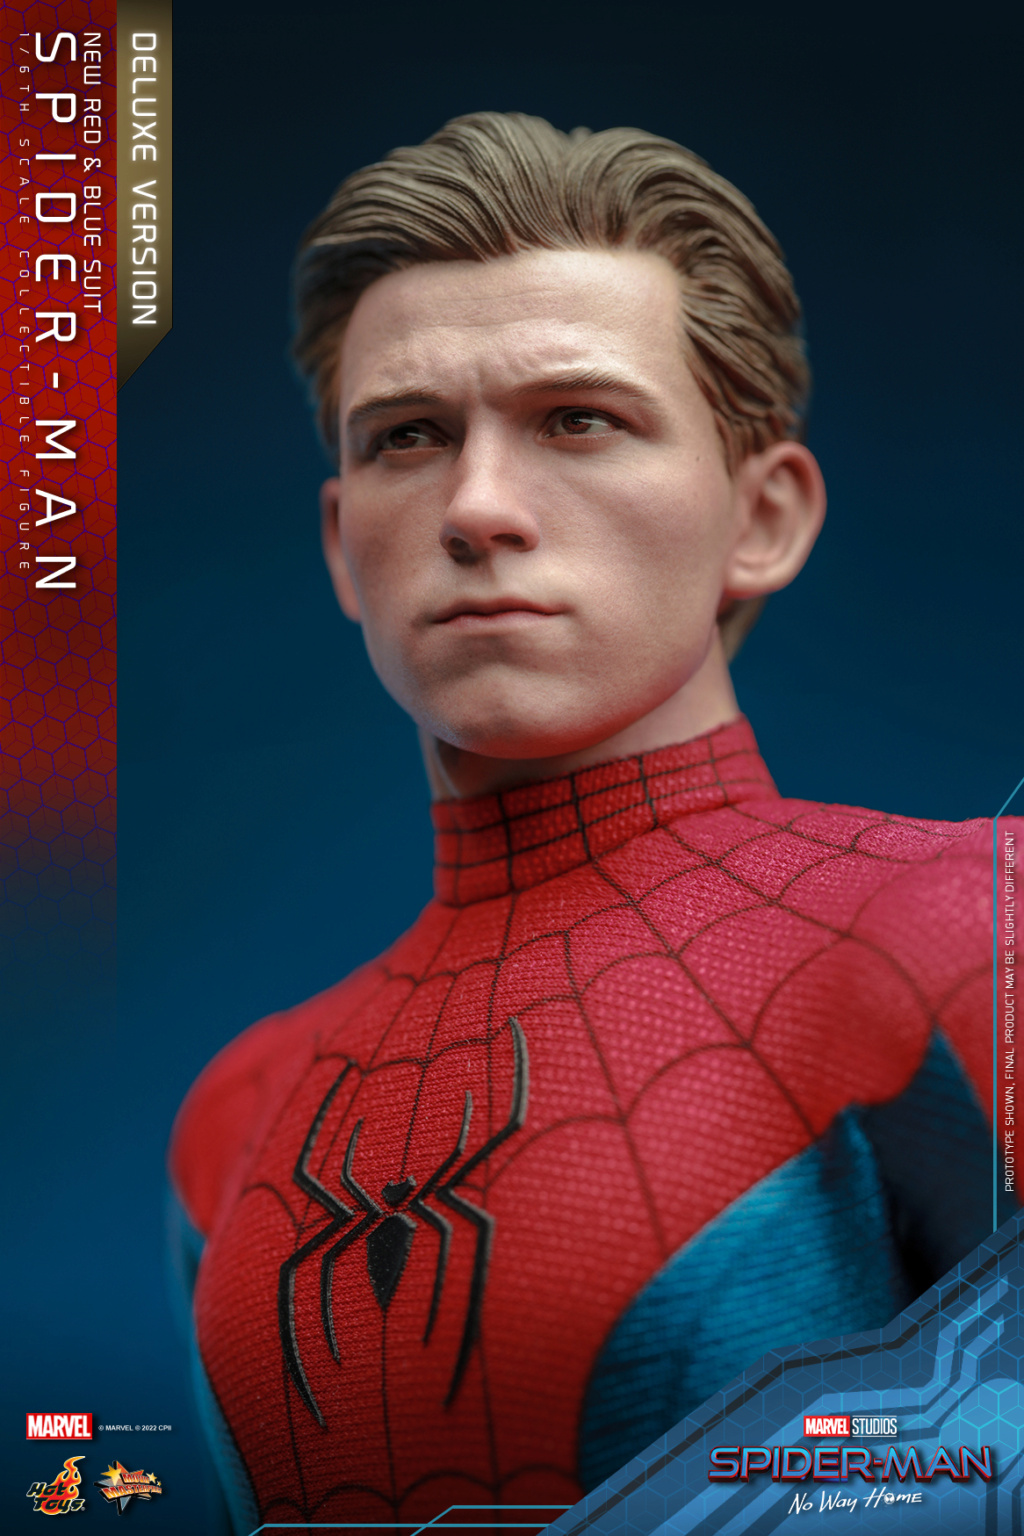 NEW PRODUCT: HOT TOYS: SPIDER-MAN: NO WAY HOME SPIDER-MAN (NEW RED AND BLUE SUIT) 1/6TH SCALE COLLECTIBLE FIGURE (standard & deluxe) 42165910